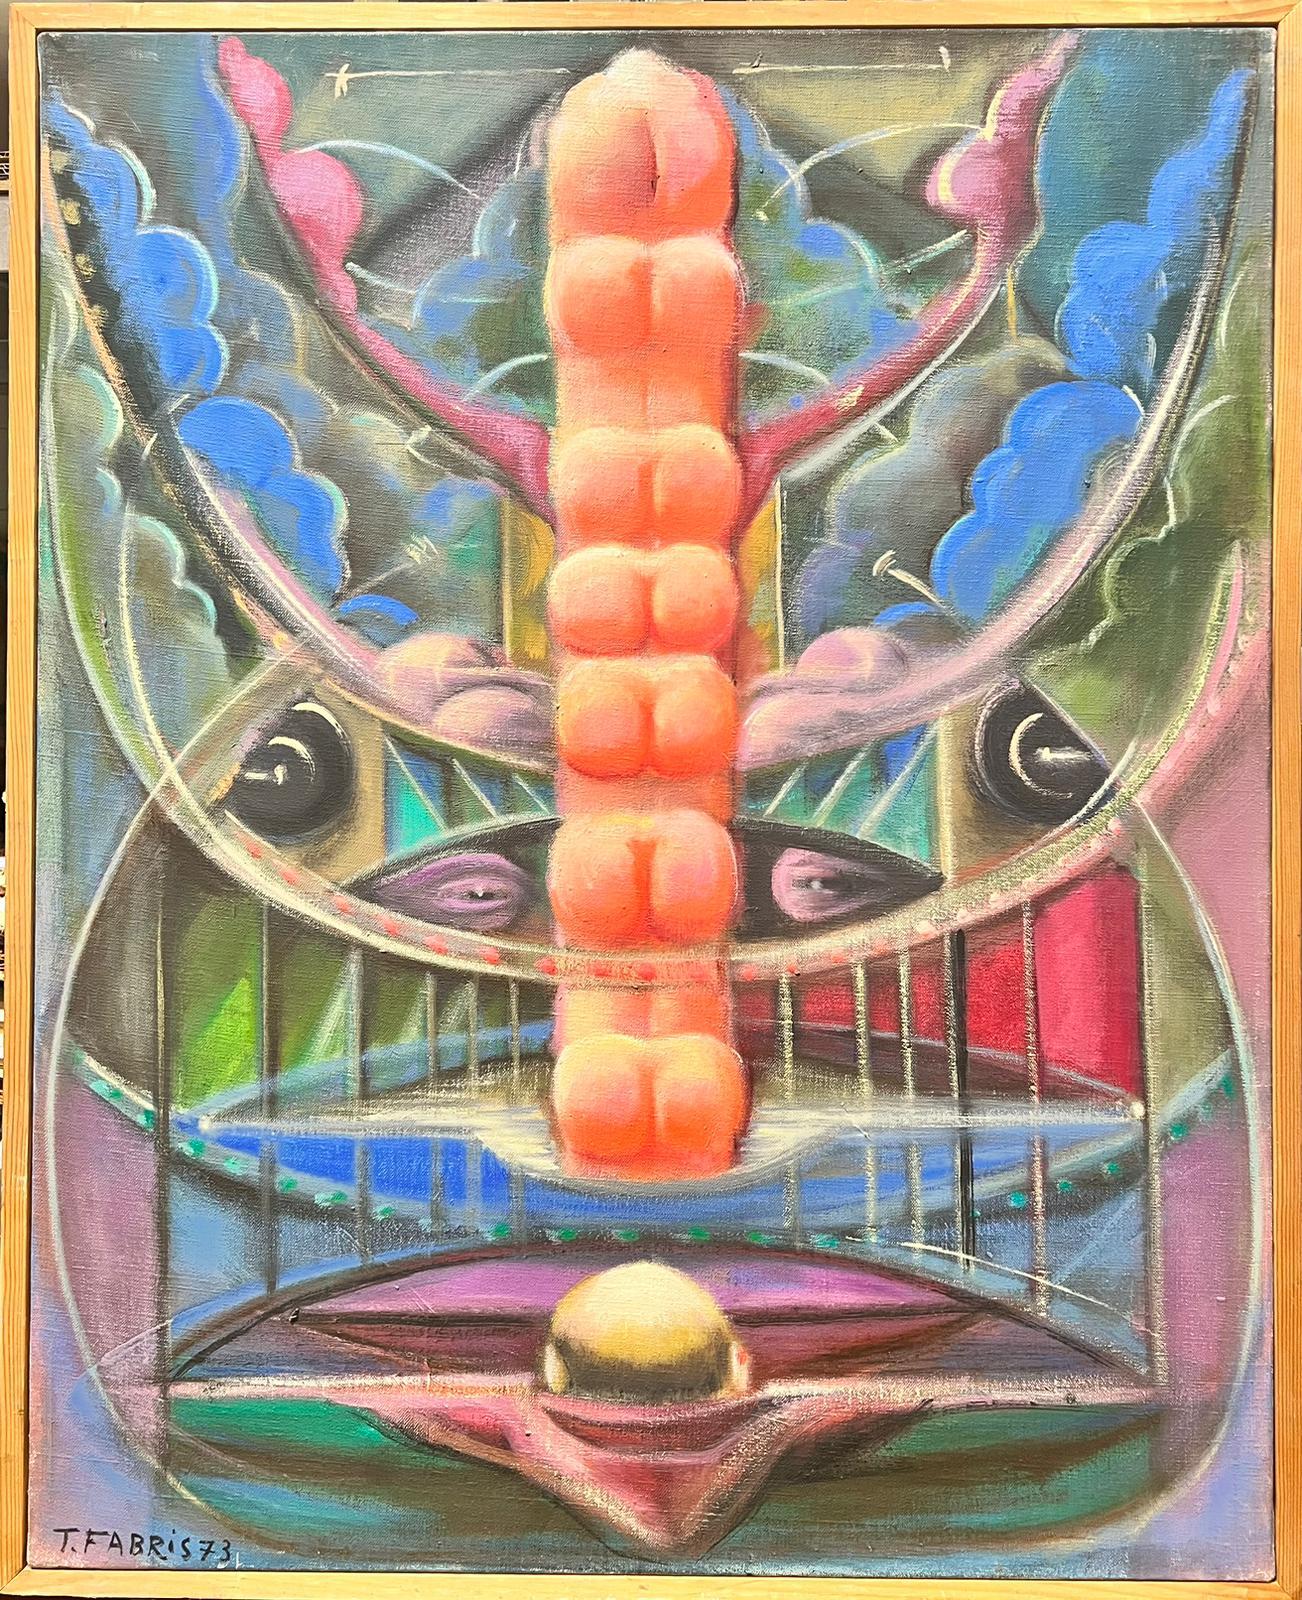 Tristan Fabris 1973, French surrealist artist
Abstract Surrealist composition 
oil on canvas, framed
framed: 33 x 27 inches
canvas: 32 x 25 inches
private collection, France
The painting is in overall very good and sound condition.
 